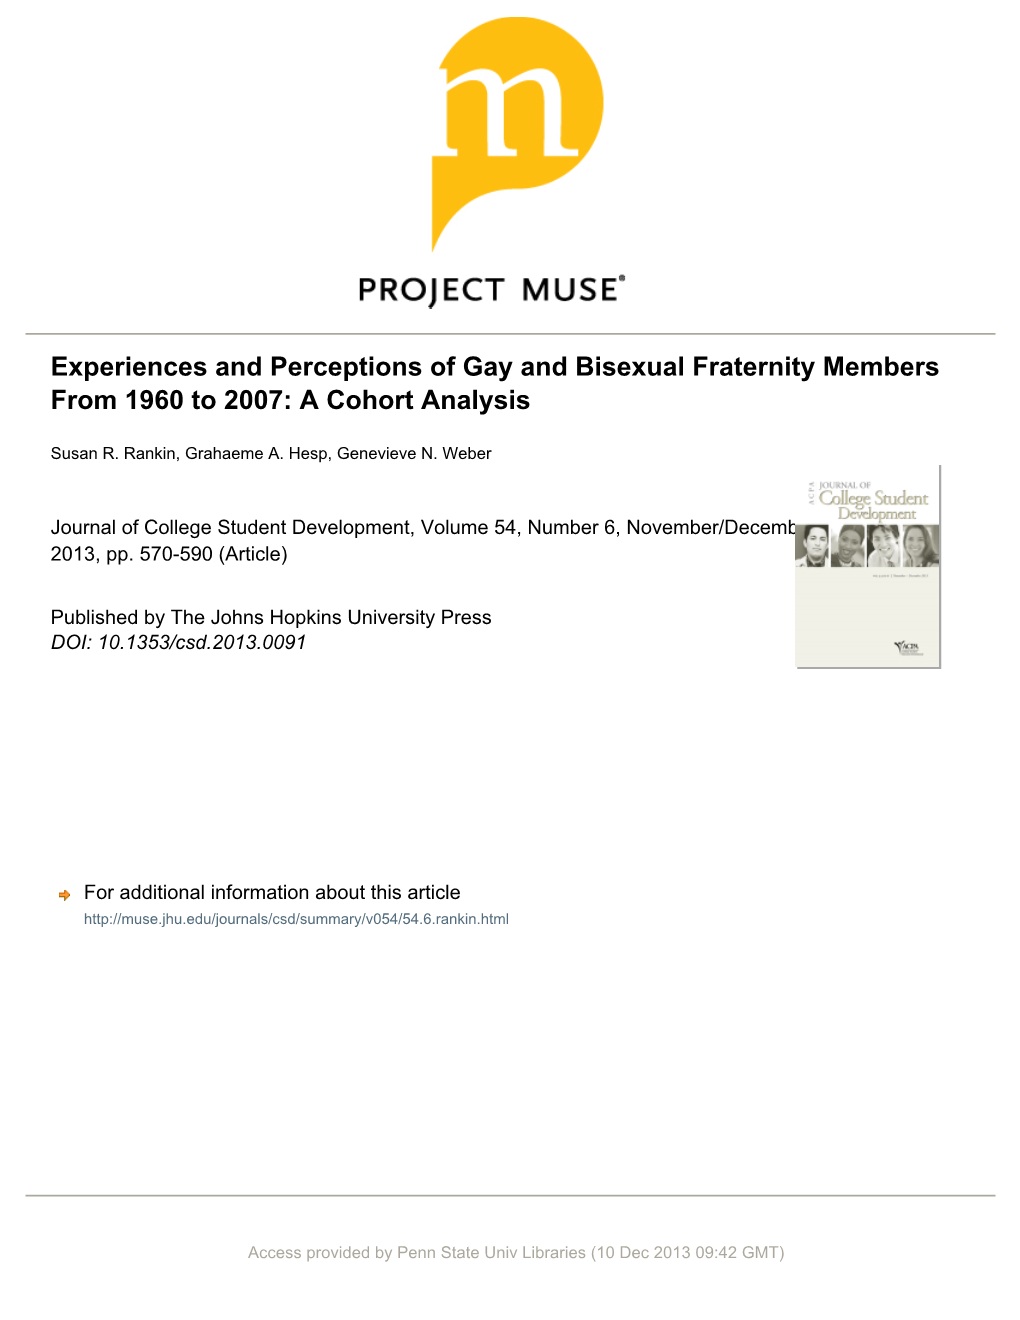 Experiences and Perceptions of Gay and Bisexual Fraternity Members from 1960 to 2007: a Cohort Analysis